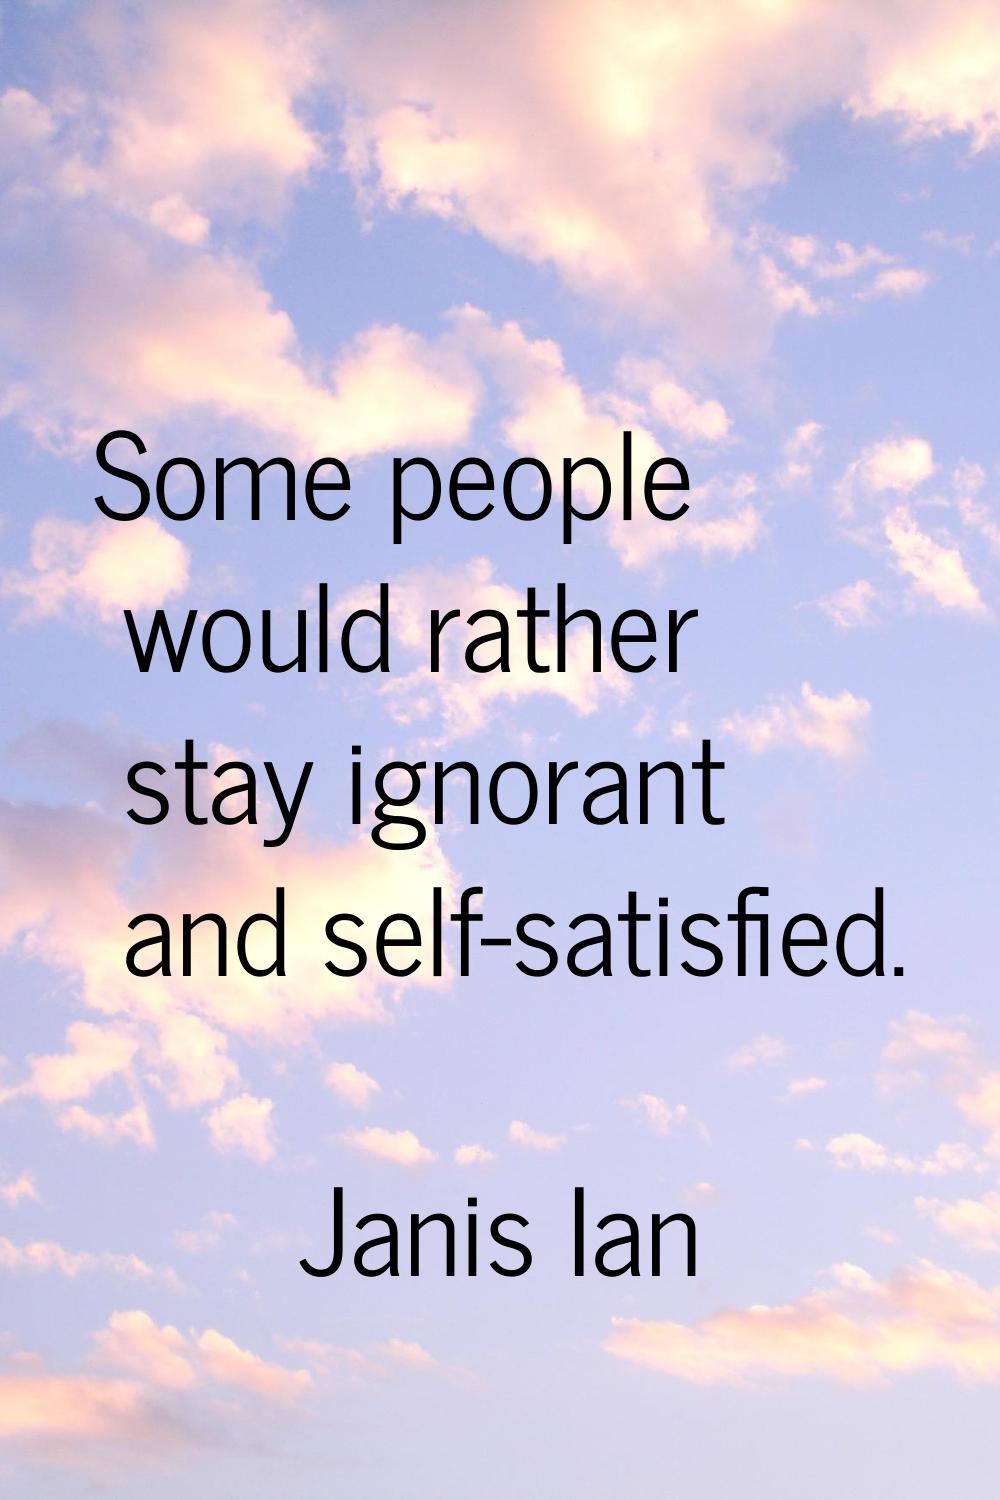 Some people would rather stay ignorant and self-satisfied.